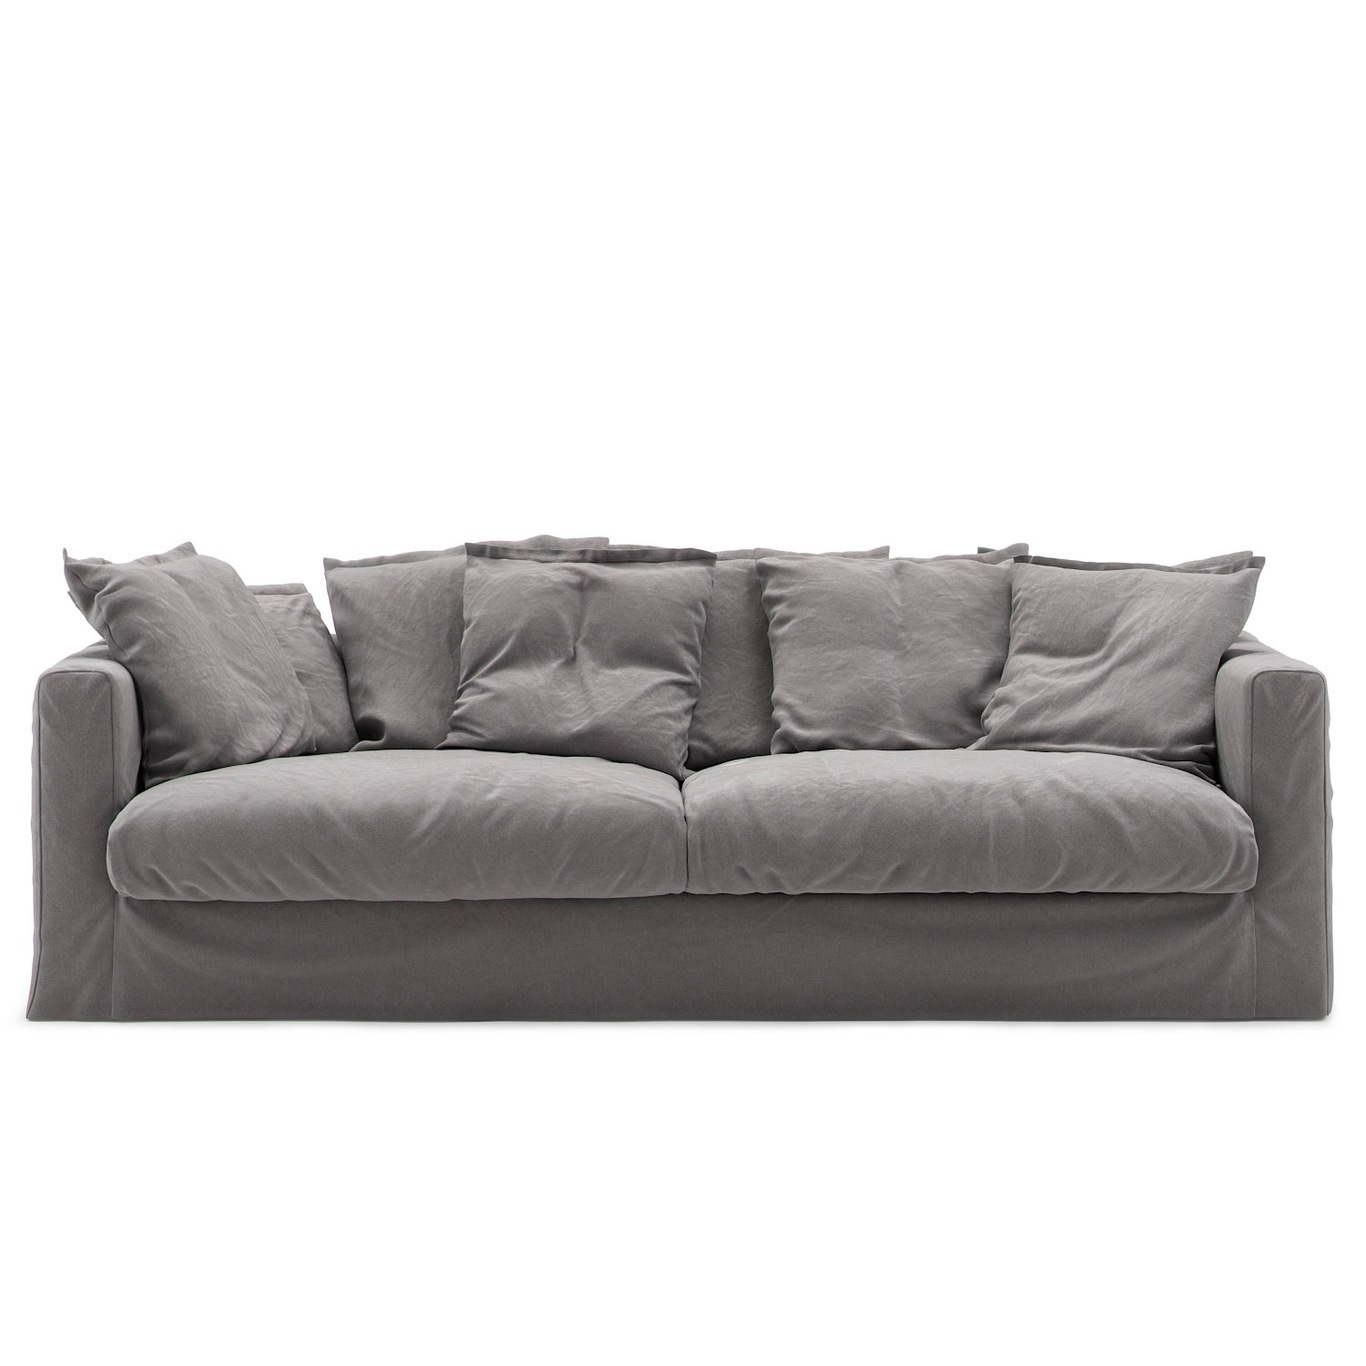 Le Grand Air Upholstery 3-Seater Cotton, Light Grey